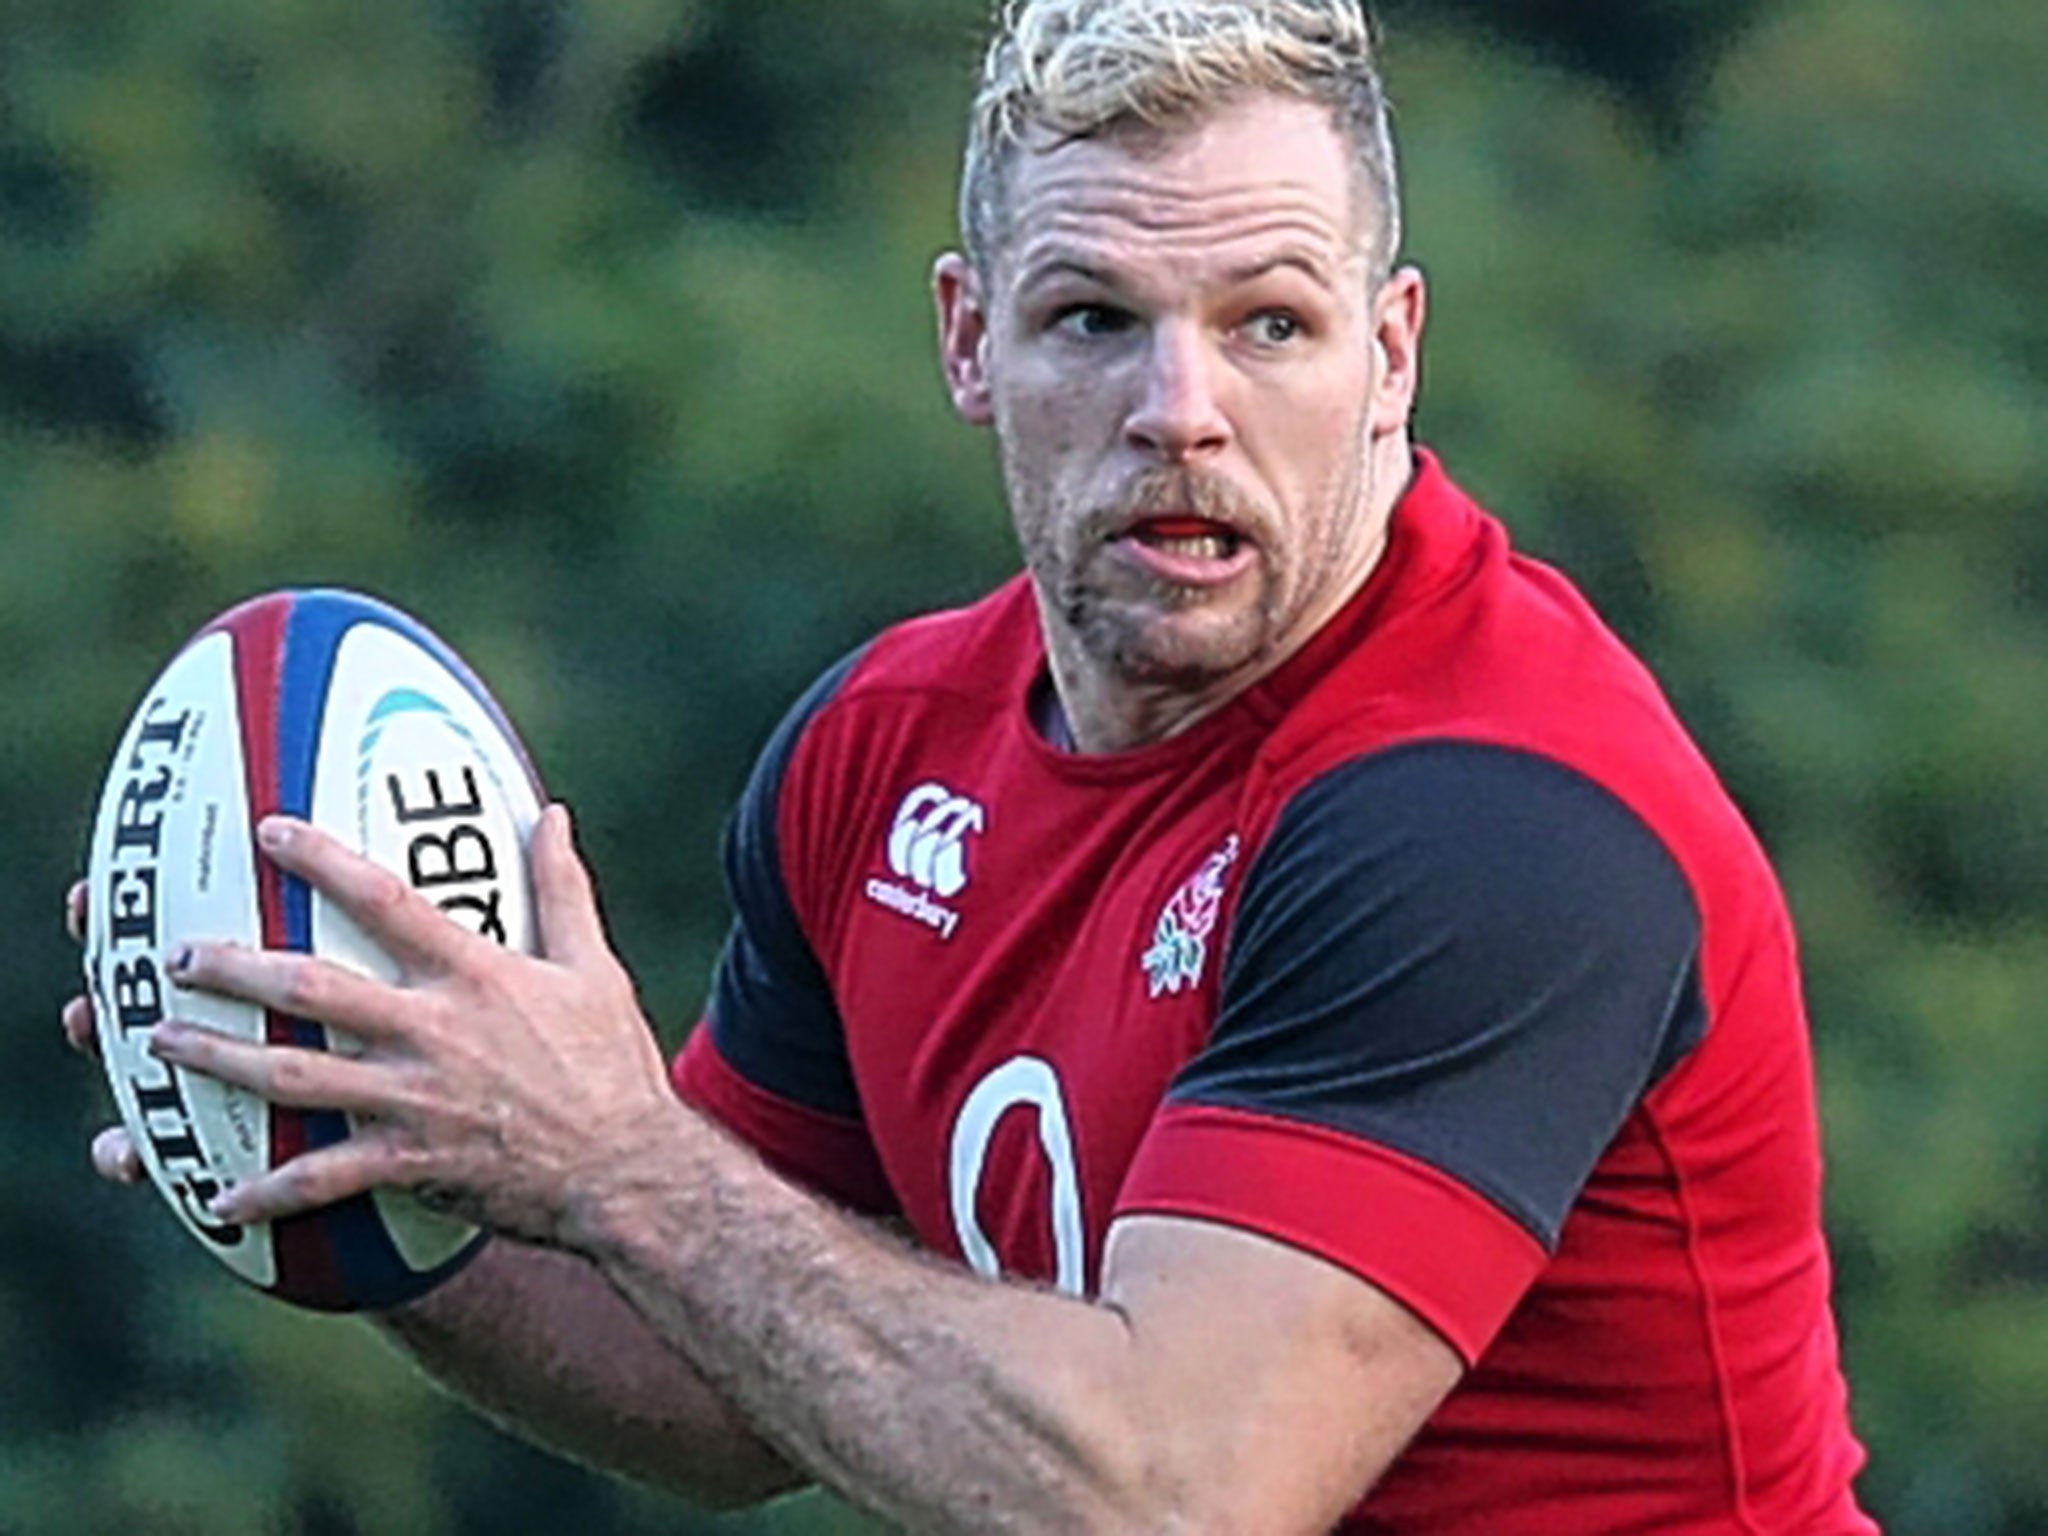 James Haskell has 51 caps and is a known quantity – England could have experimented